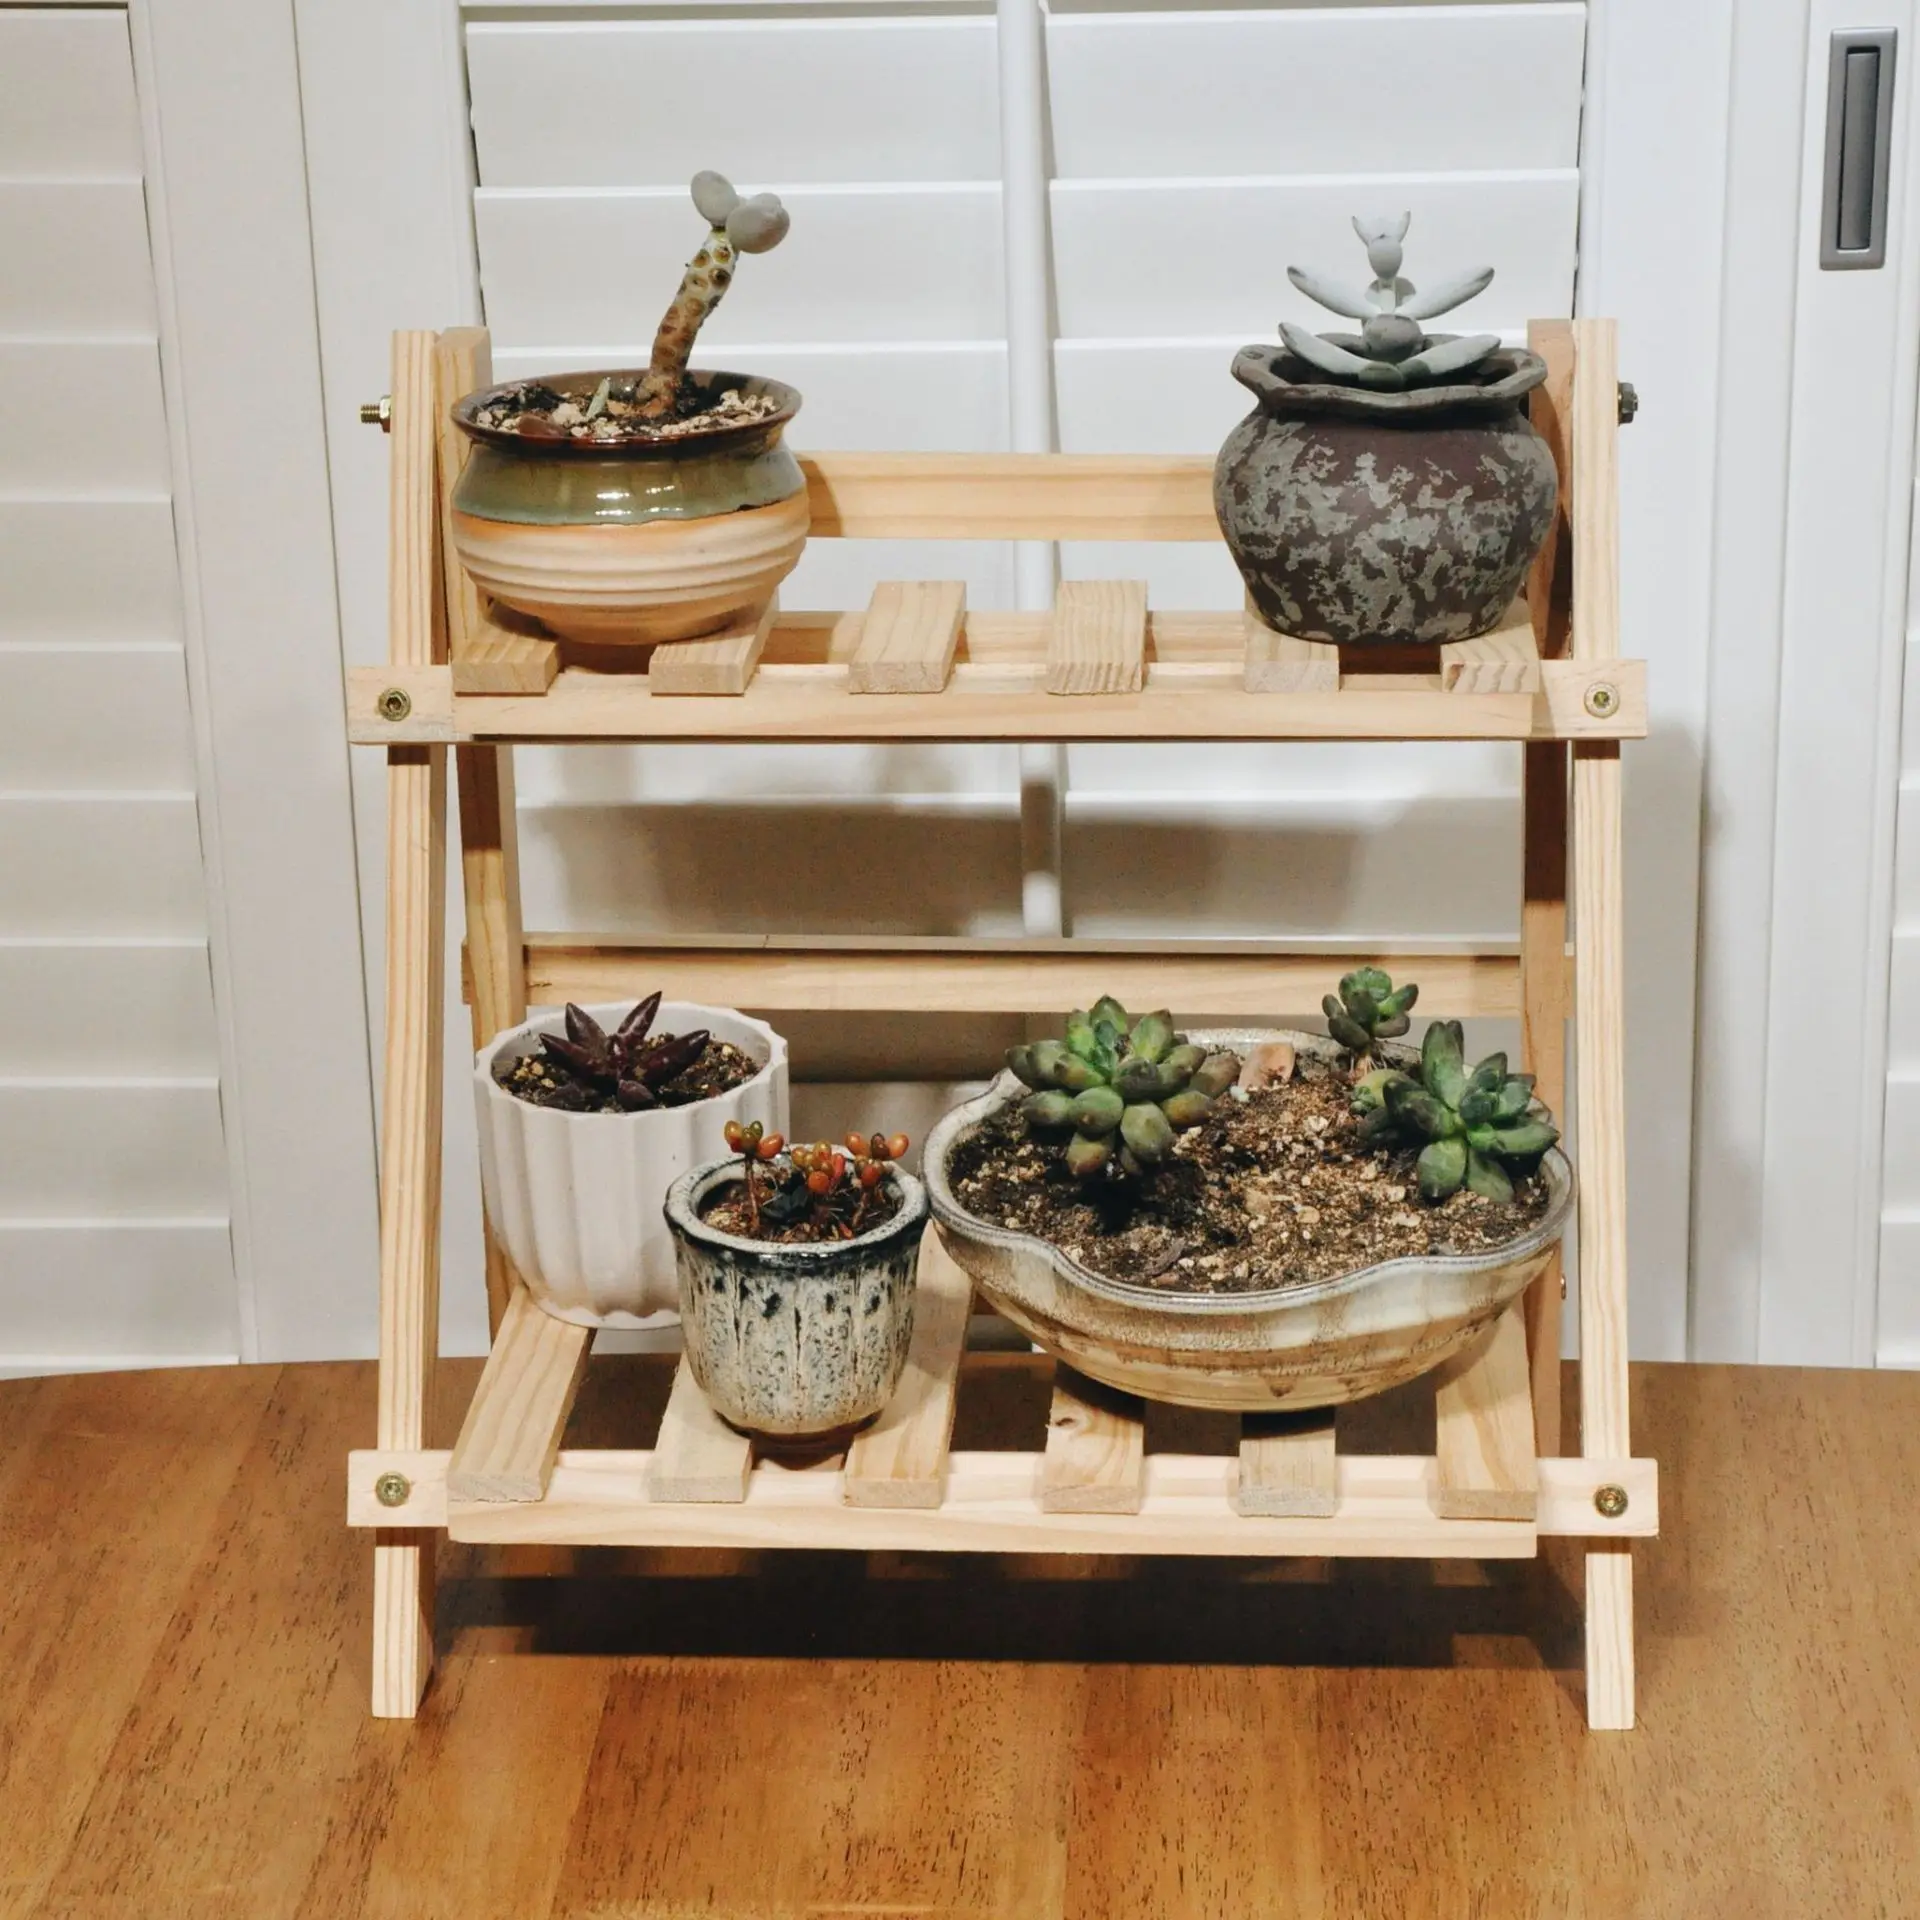 2 Tiers Foldable Plant Shelves Balcony Flower Stand Rack Wooden Indoor & Outdoor Flower Pot Stand Home Planter Display Organizer